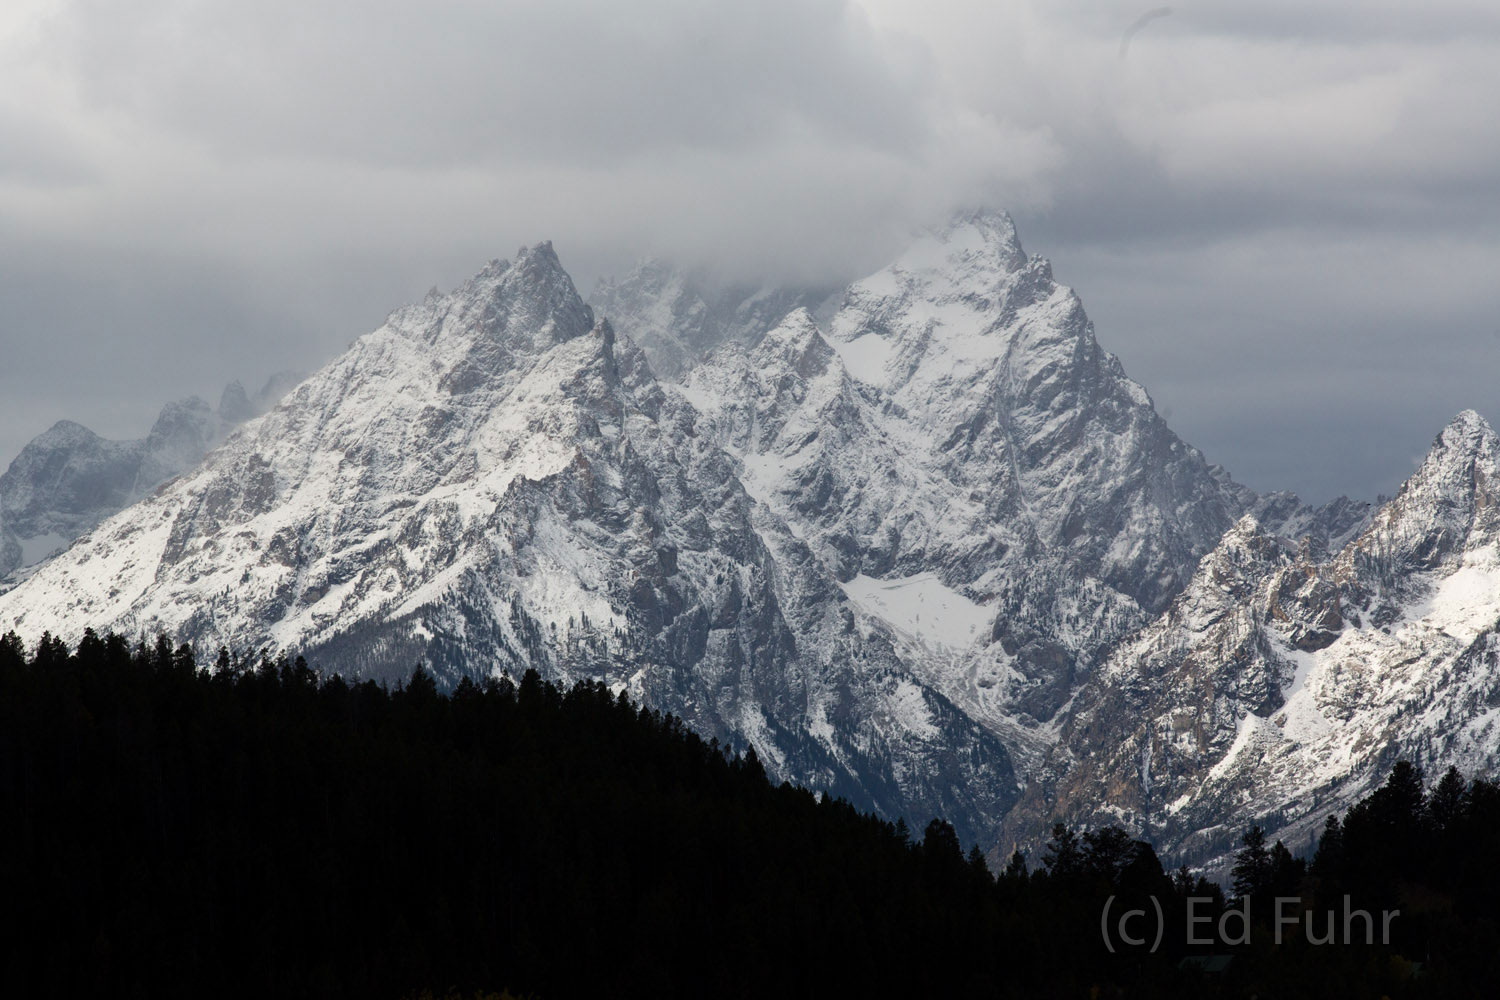 A dusting of snow kisses the higher elevations of the Teton range.